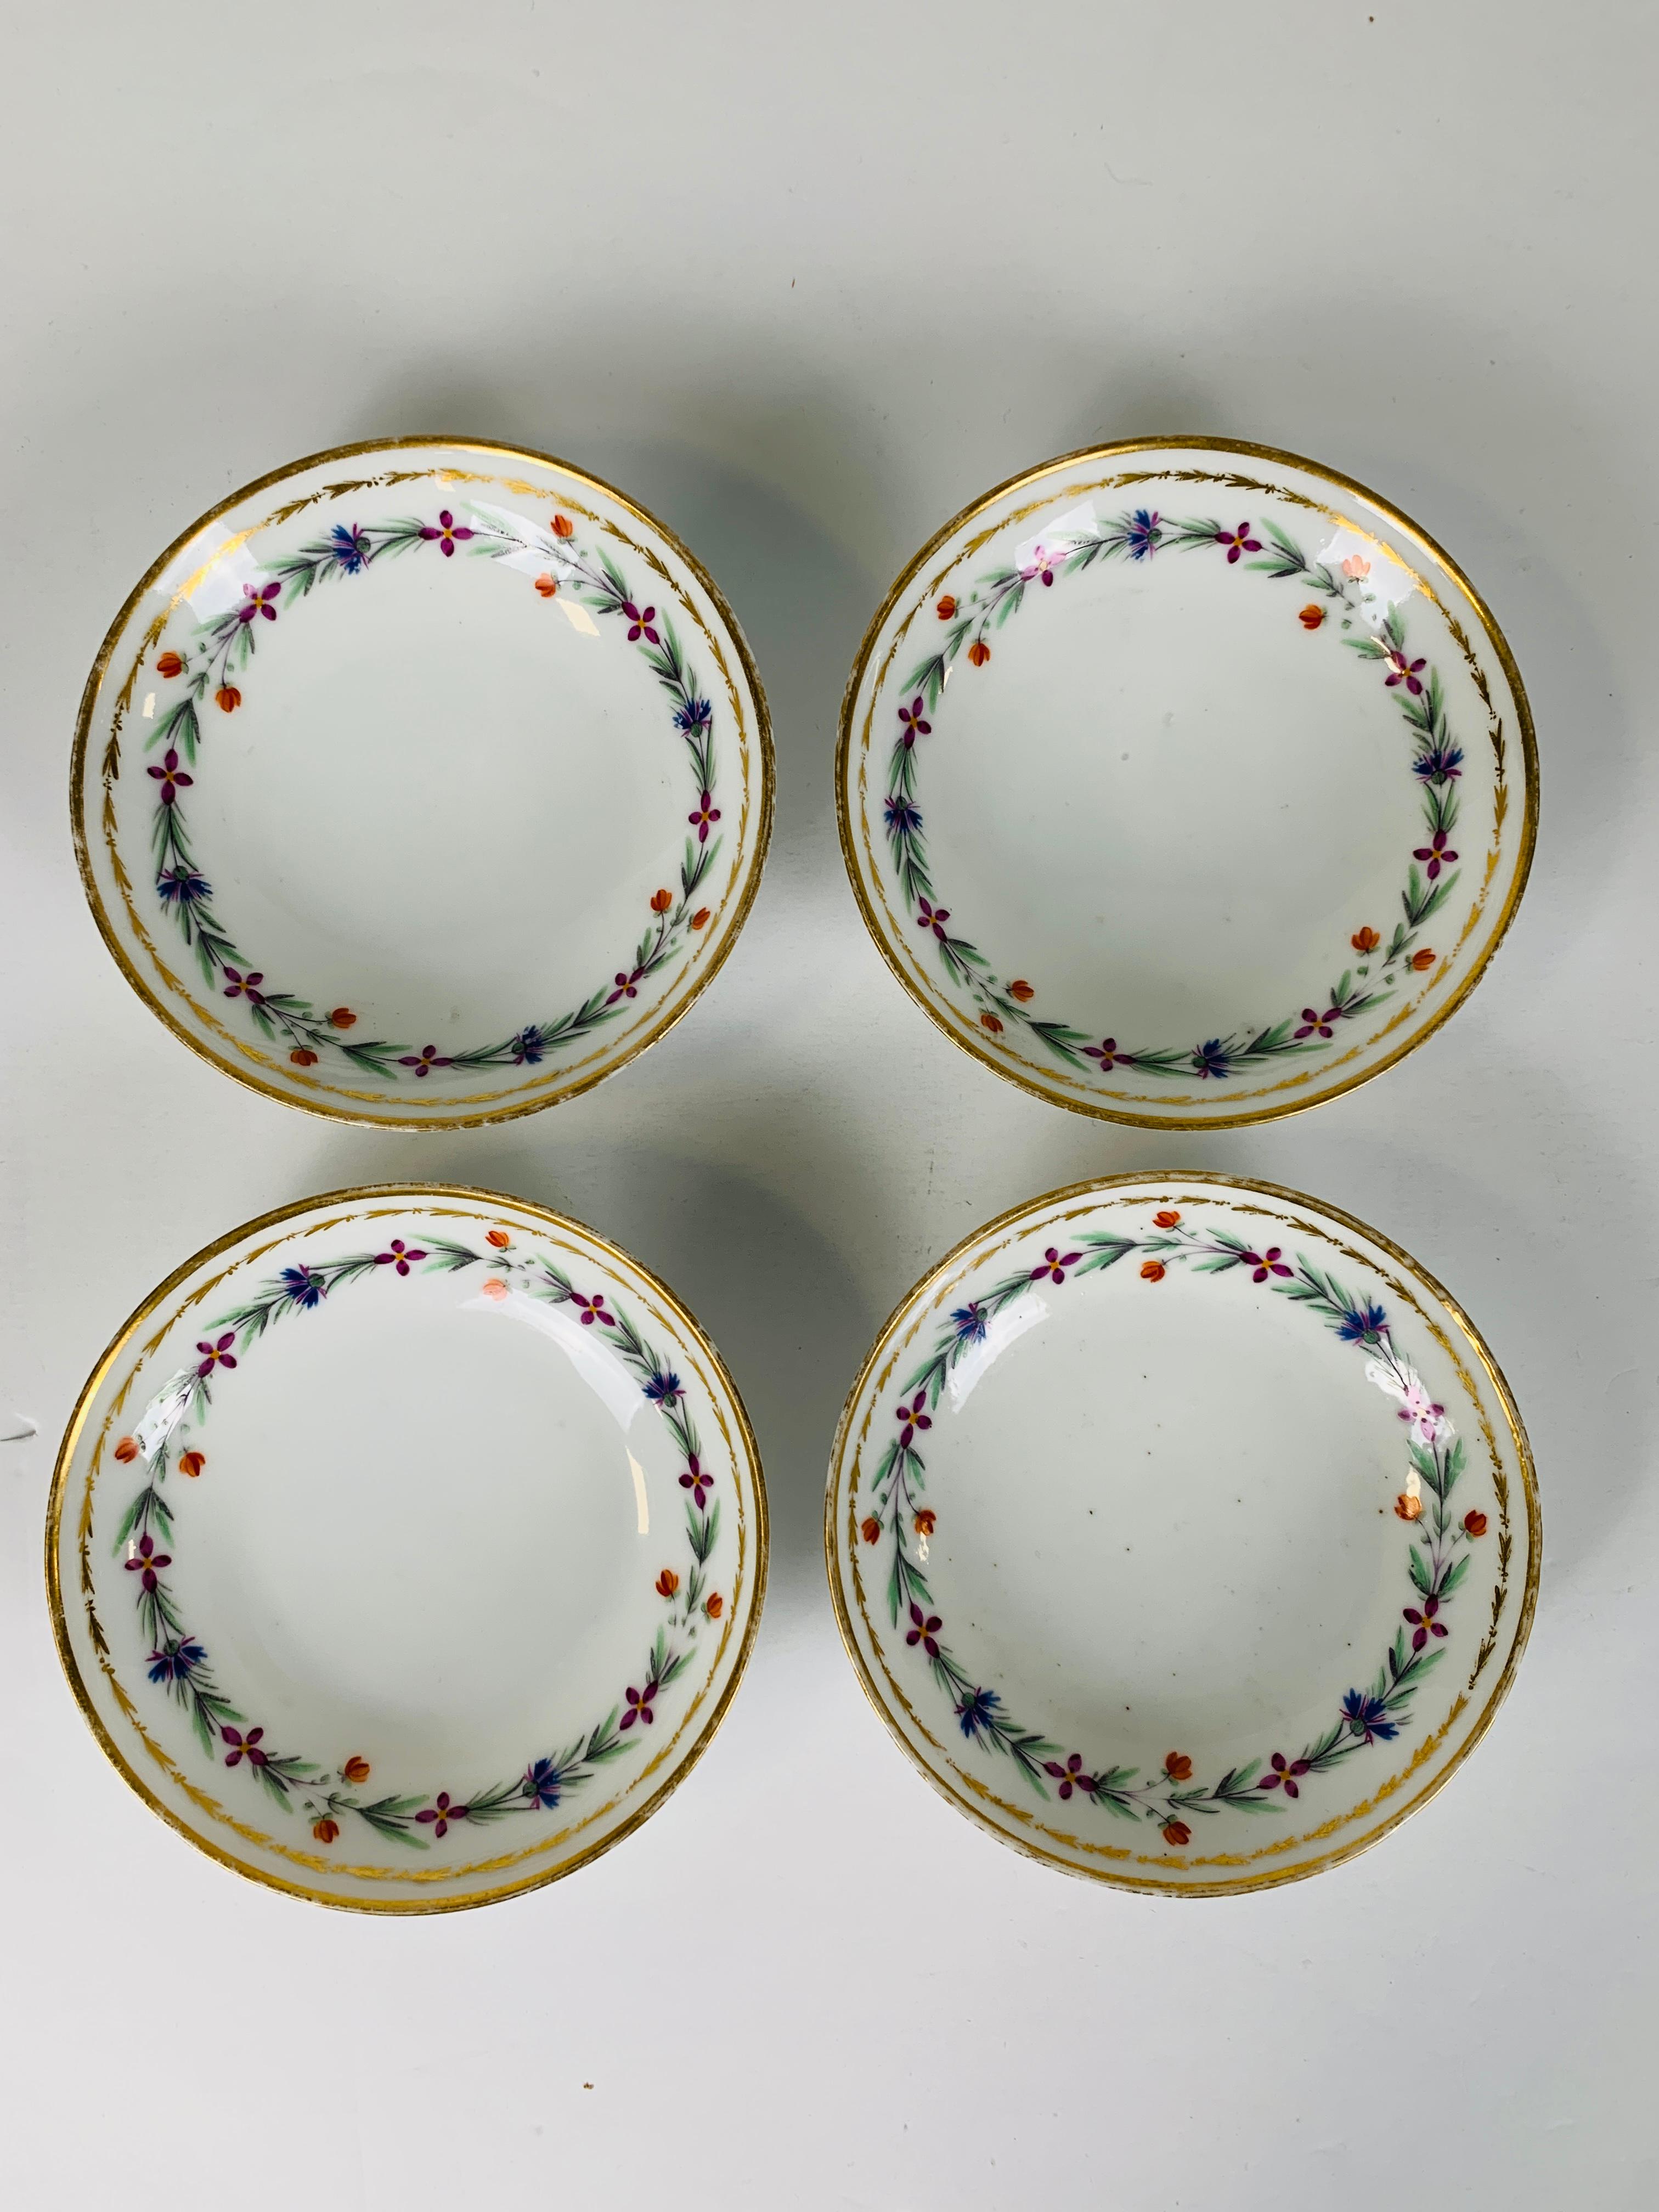 Provenance: The Private Collection of Mario Buatta
These four elegant 18th century saucers were made by 